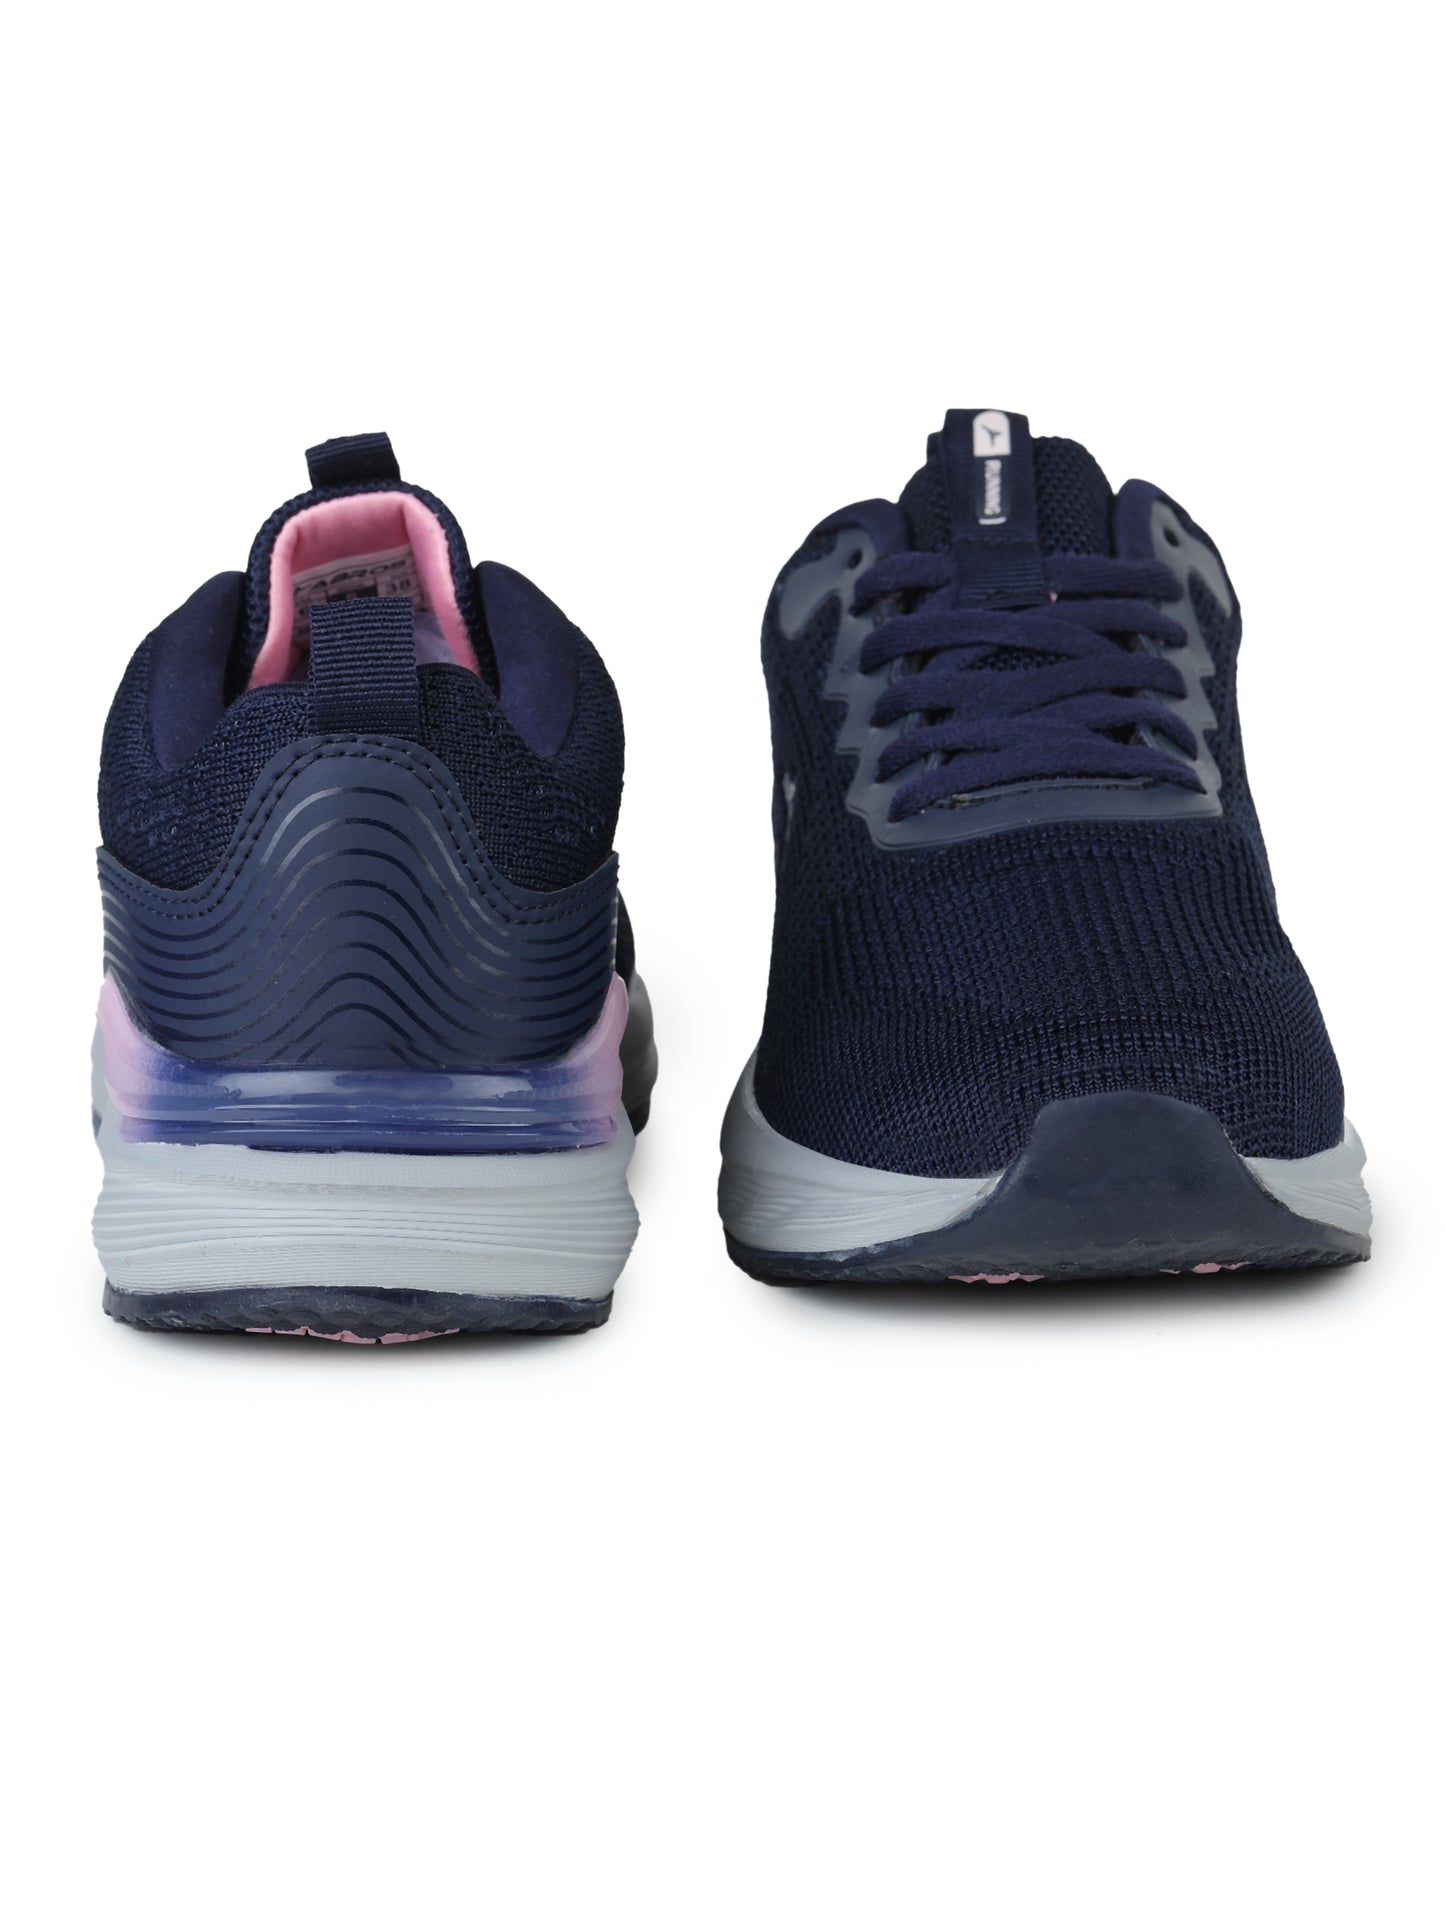 ABROS GRACE SPORTS SHOES FOR WOMEN